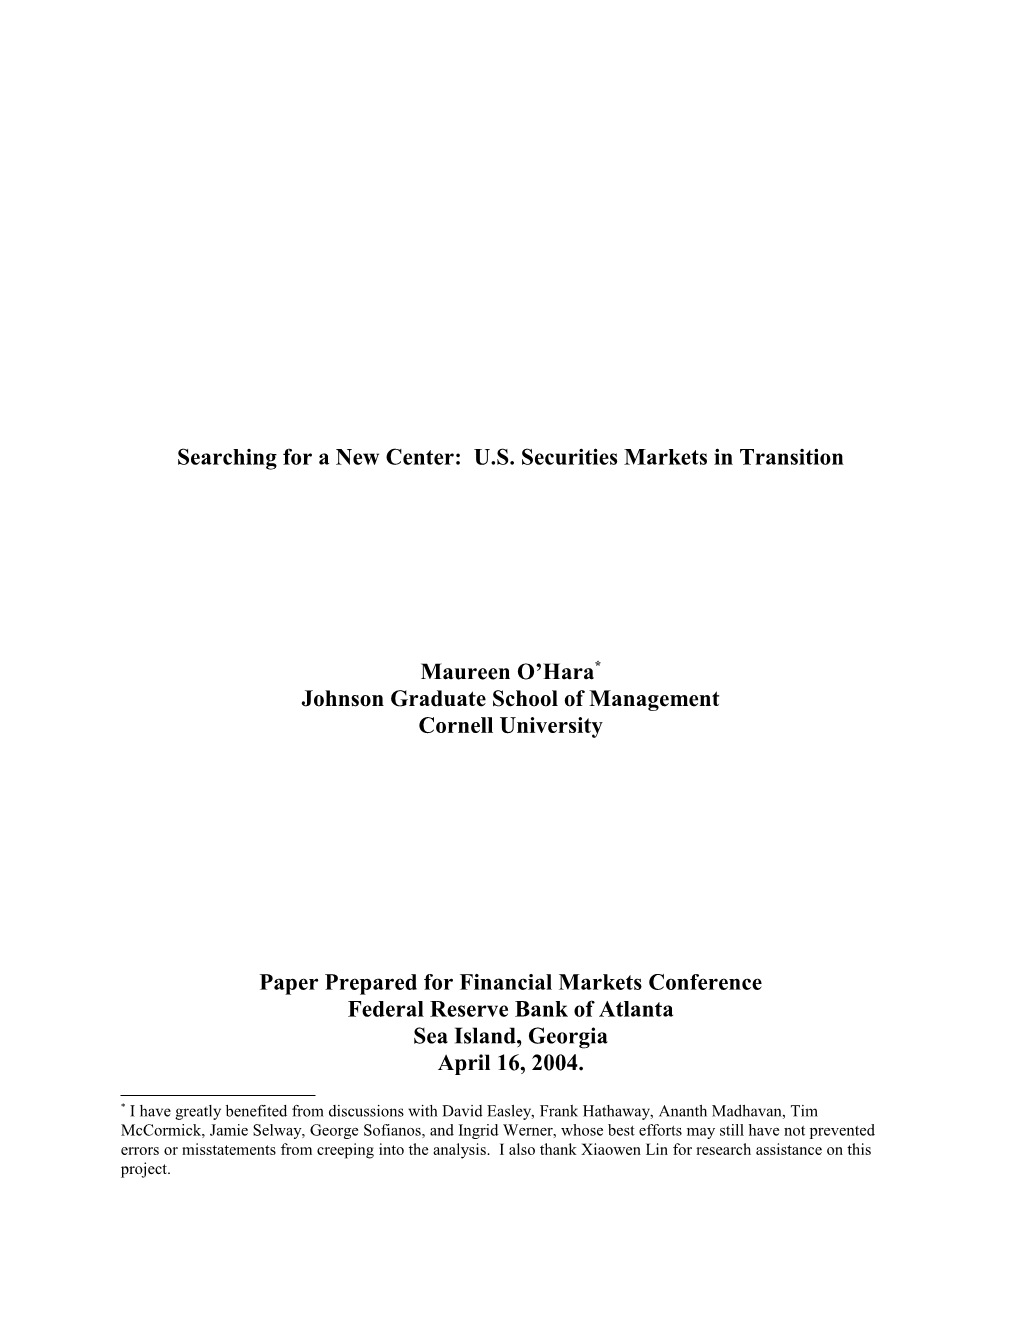 Searching for a New Center: U.S. Securities Markets in Transition